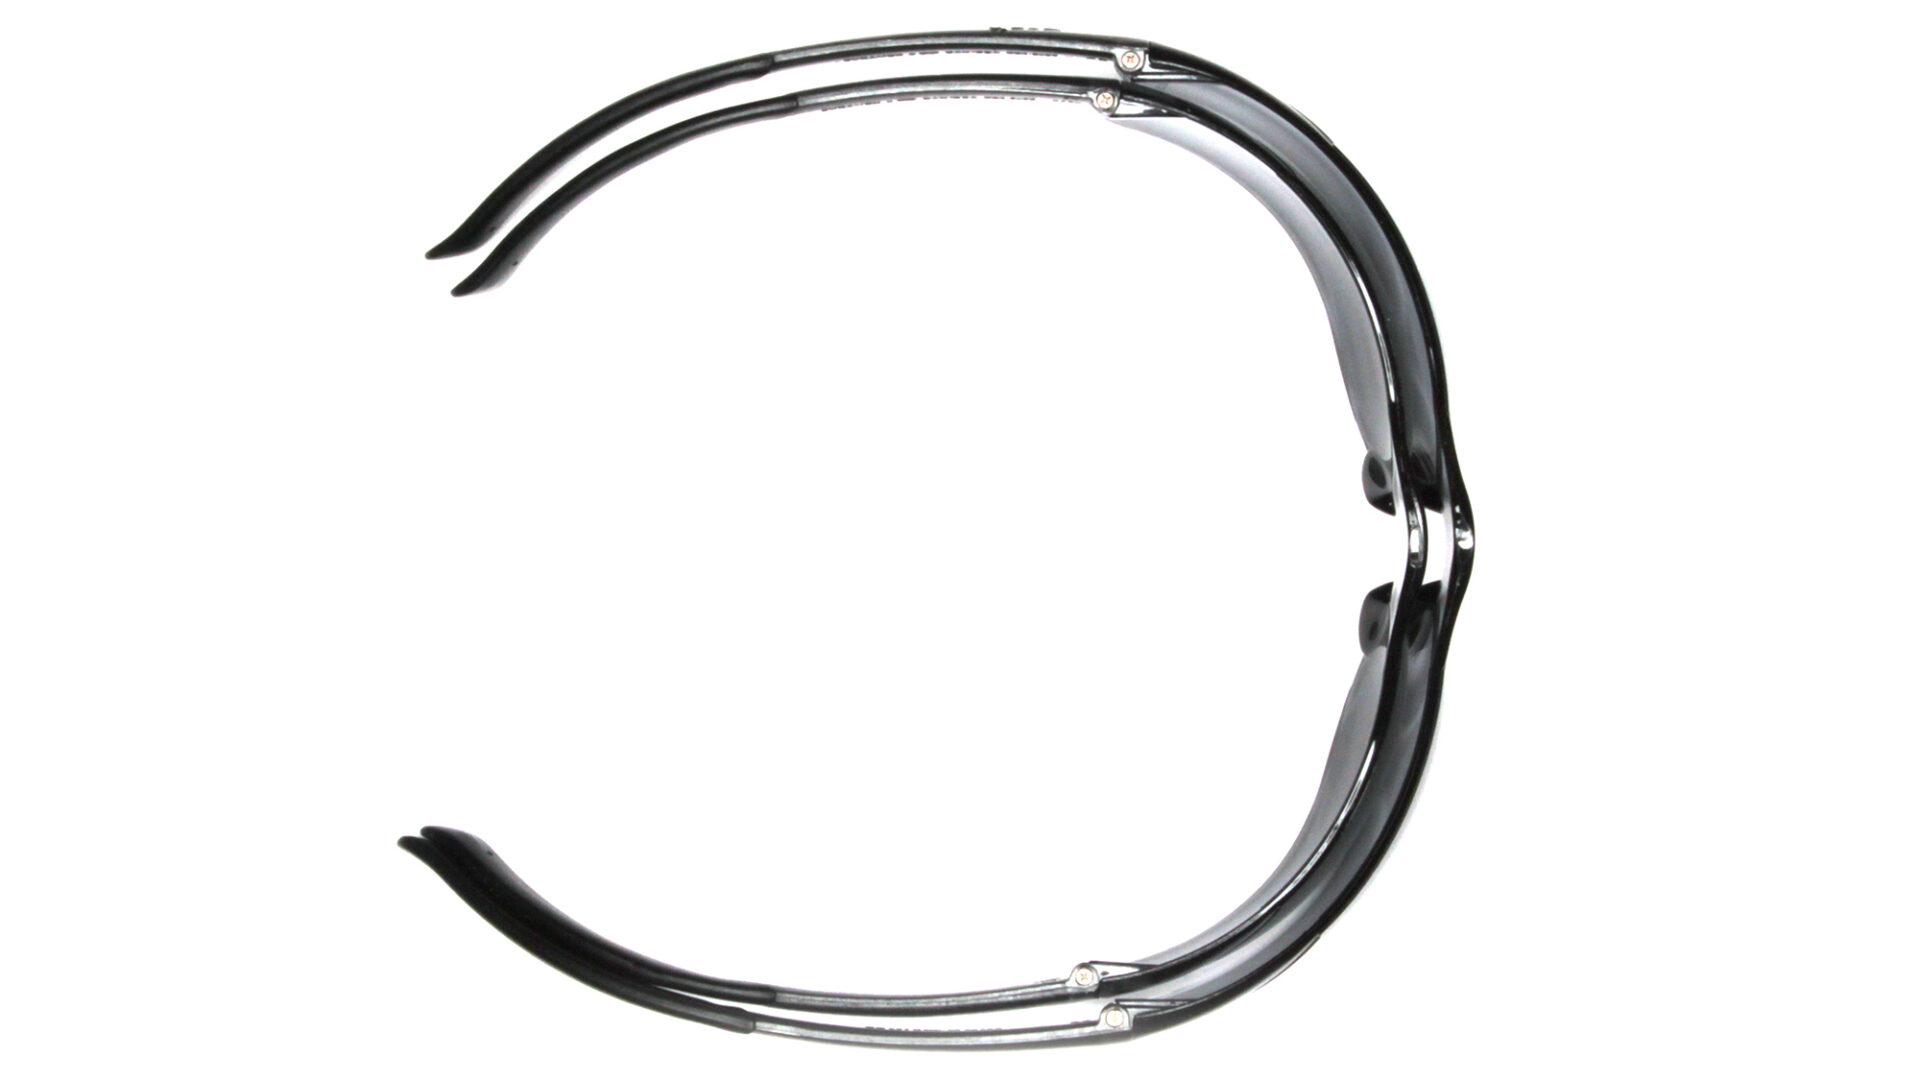 Top View of Doble Layered Ztek Glasses